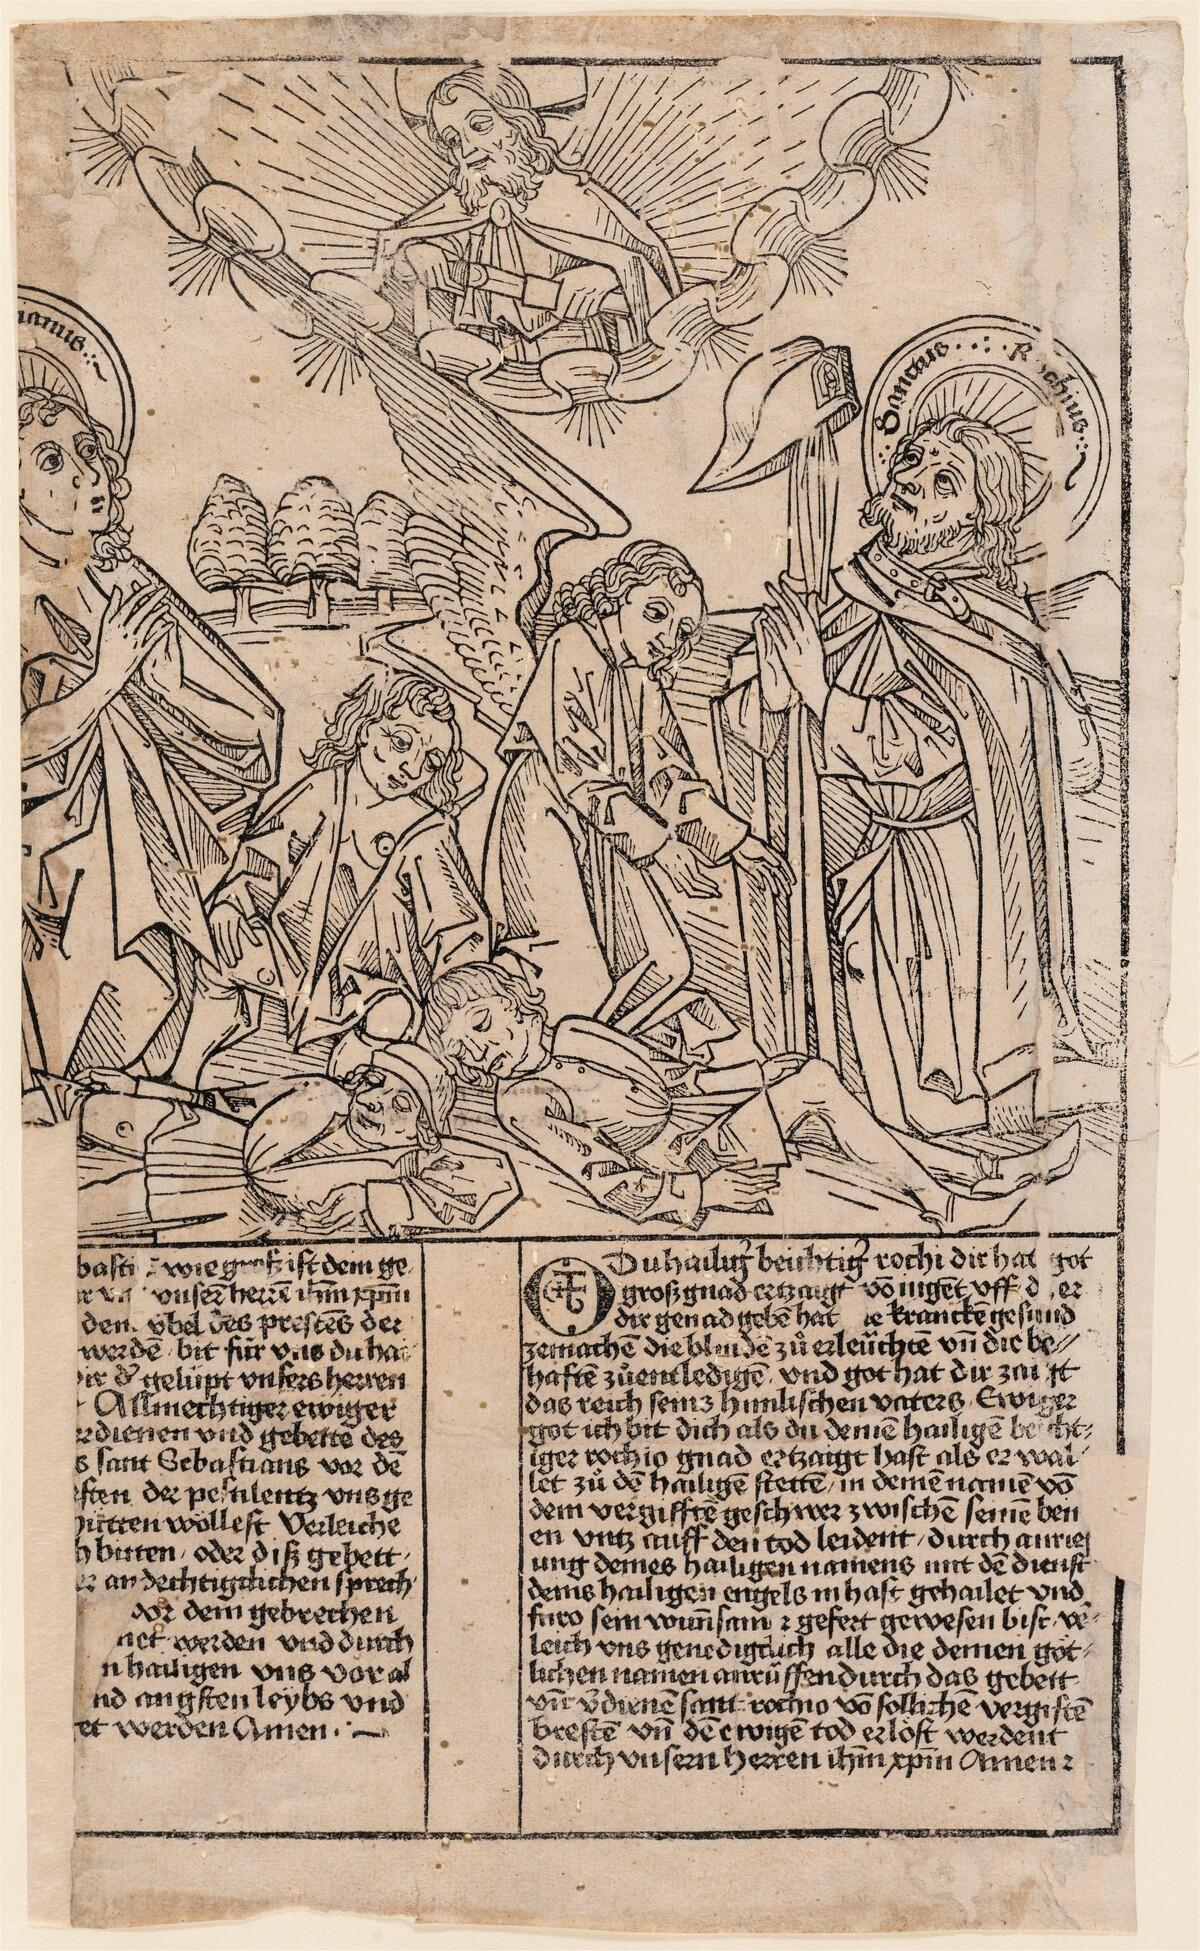 A woodcut illustration depicts four figures praying over two people dying of plague as God looks at them through an opening in the sky; with text of a prayer below.